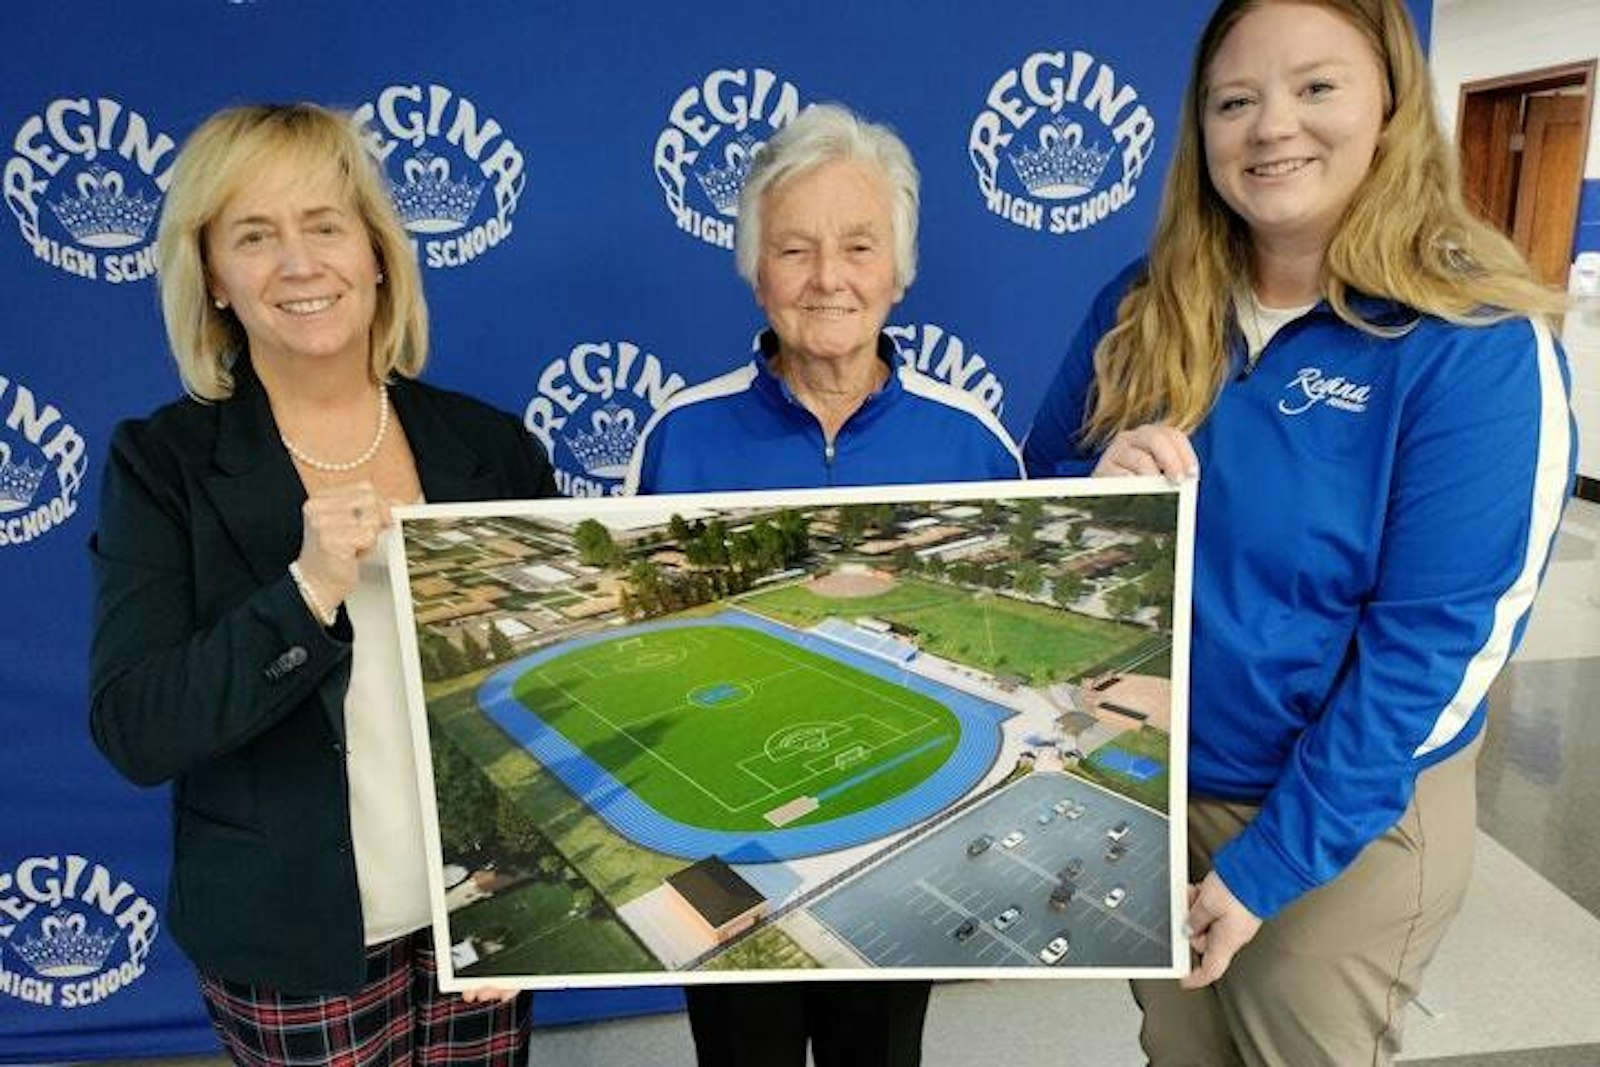 At the announcement a year ago about a $4.5 million project to provide facilities for tennis, track, lacrosse, soccer, field hockey and softball, Mary Treder Lang (left), president of Regina High School, and athletic director Emily Frikken (right) hold a rendering of an athletic complex named in honor of Diane Laffey (center), who served Regina for 52 years as athletic director and coach.